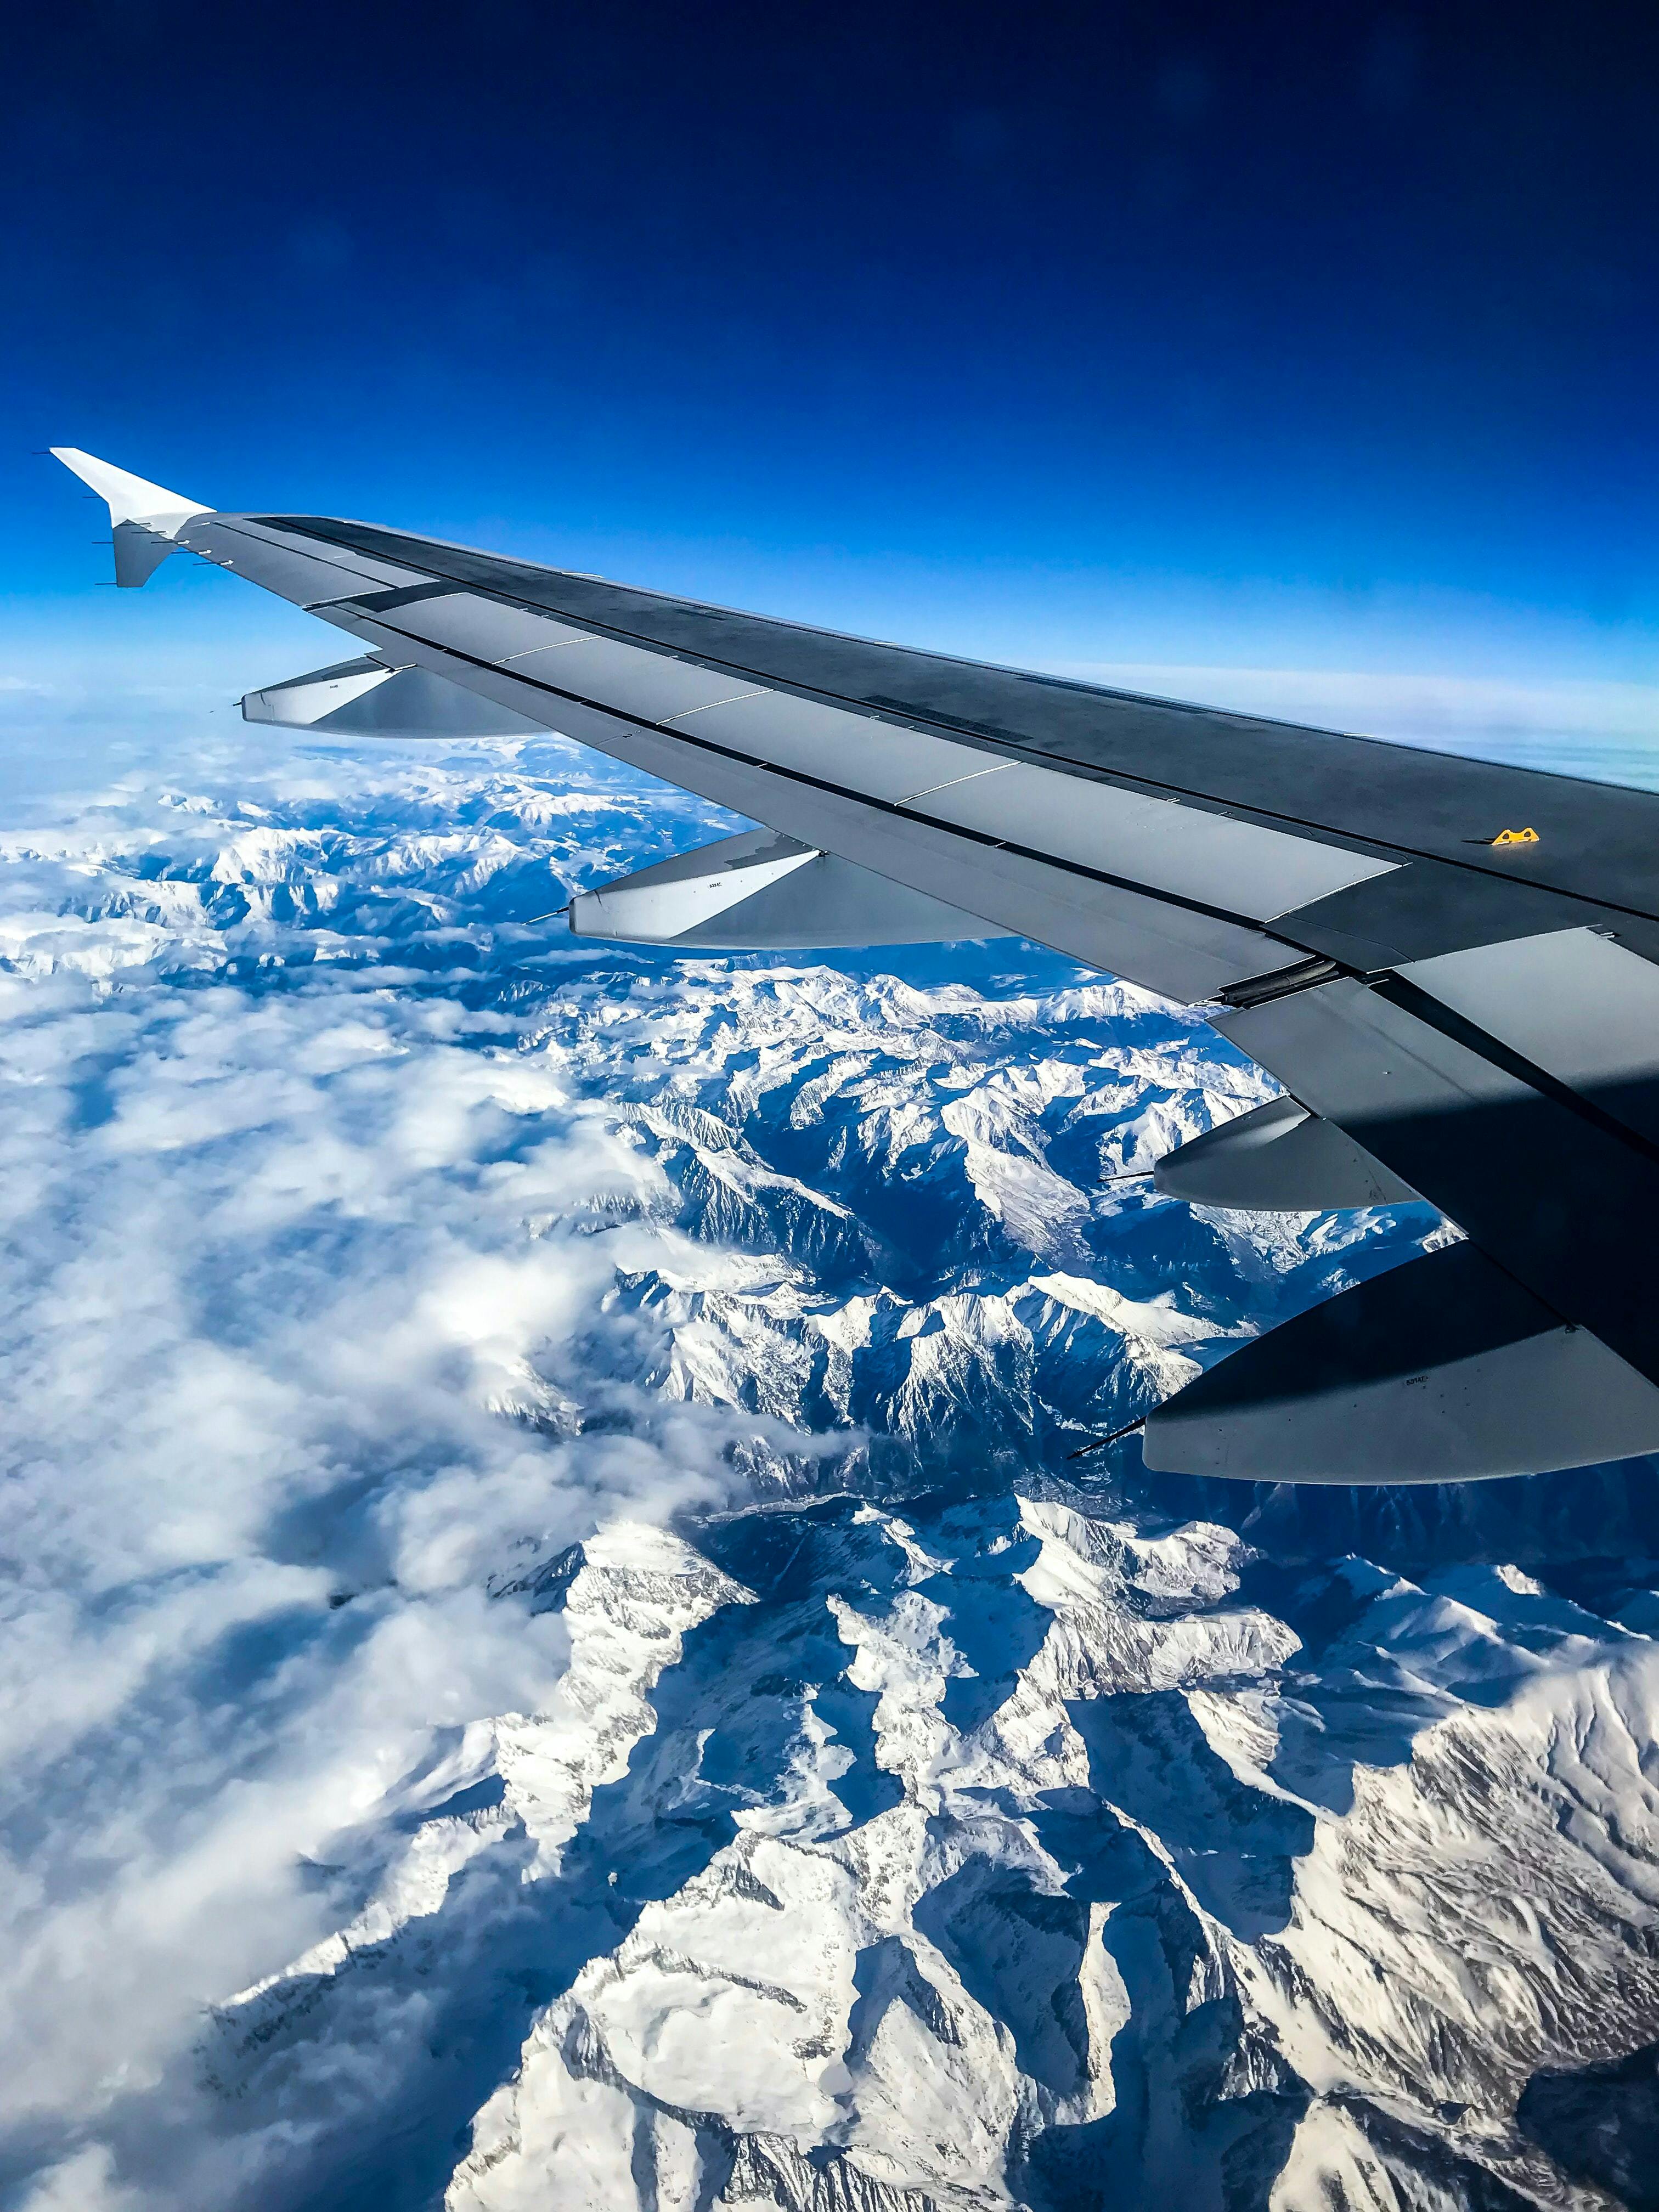 A view out of a plane window looking down at snowy mountains.